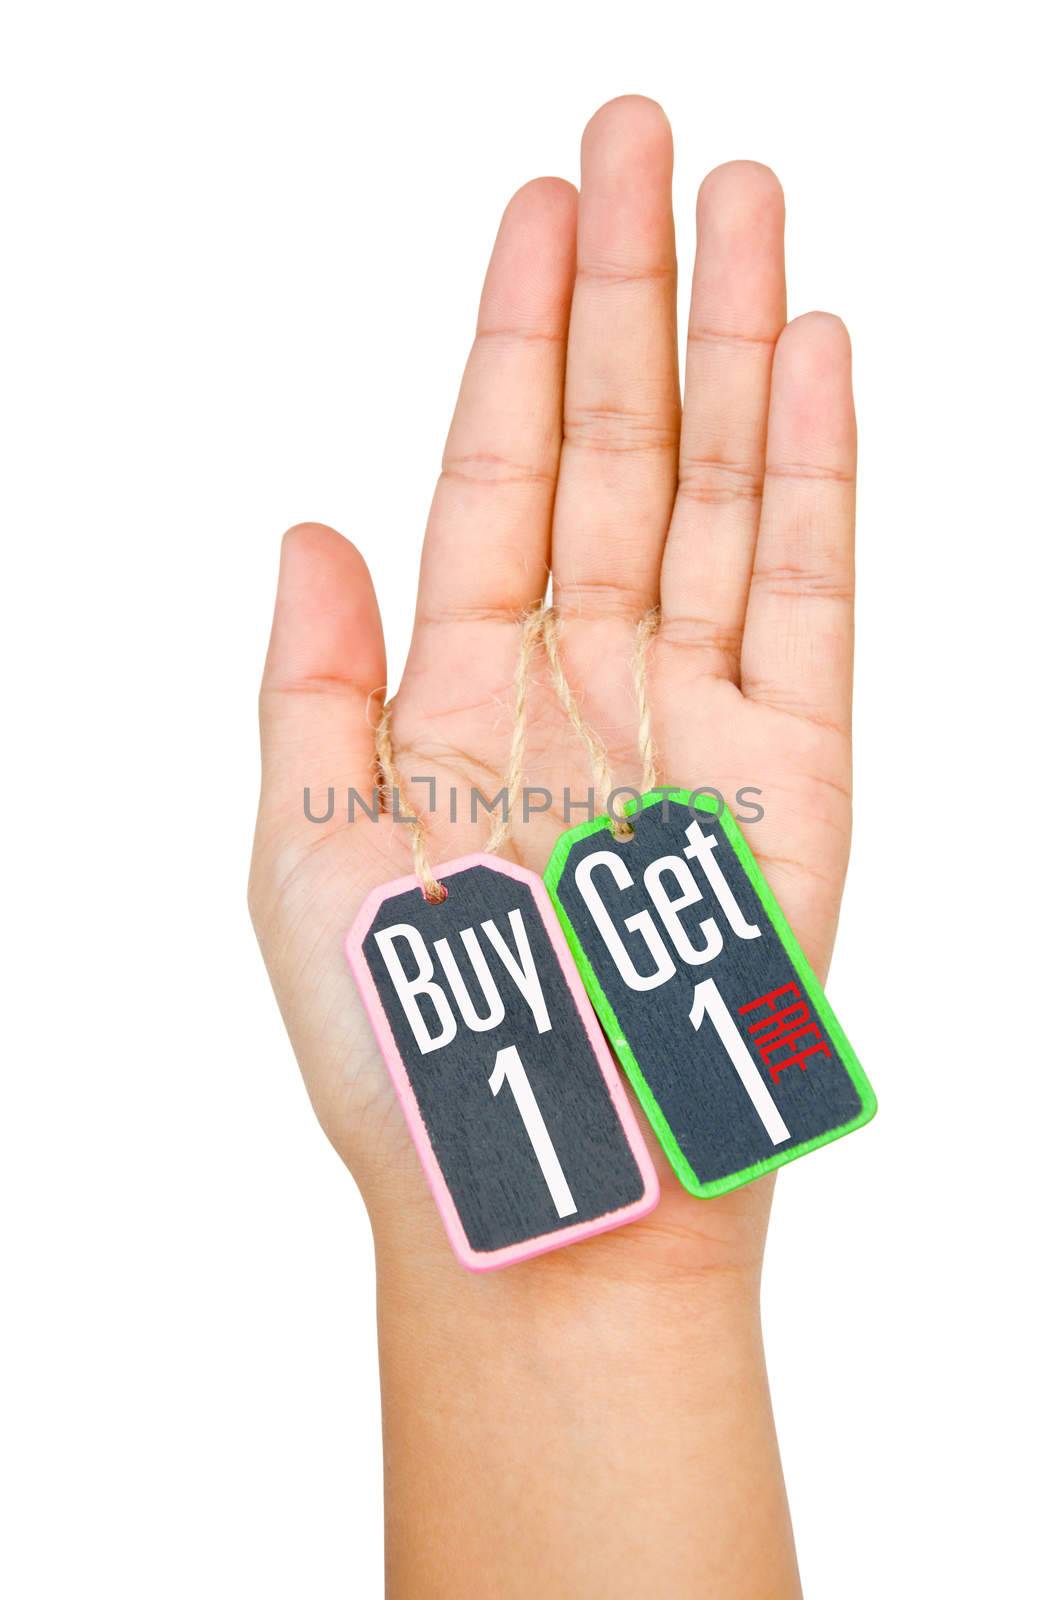 Buy 1 Get 1 label tag on women hand isolated on white background. clipping path.